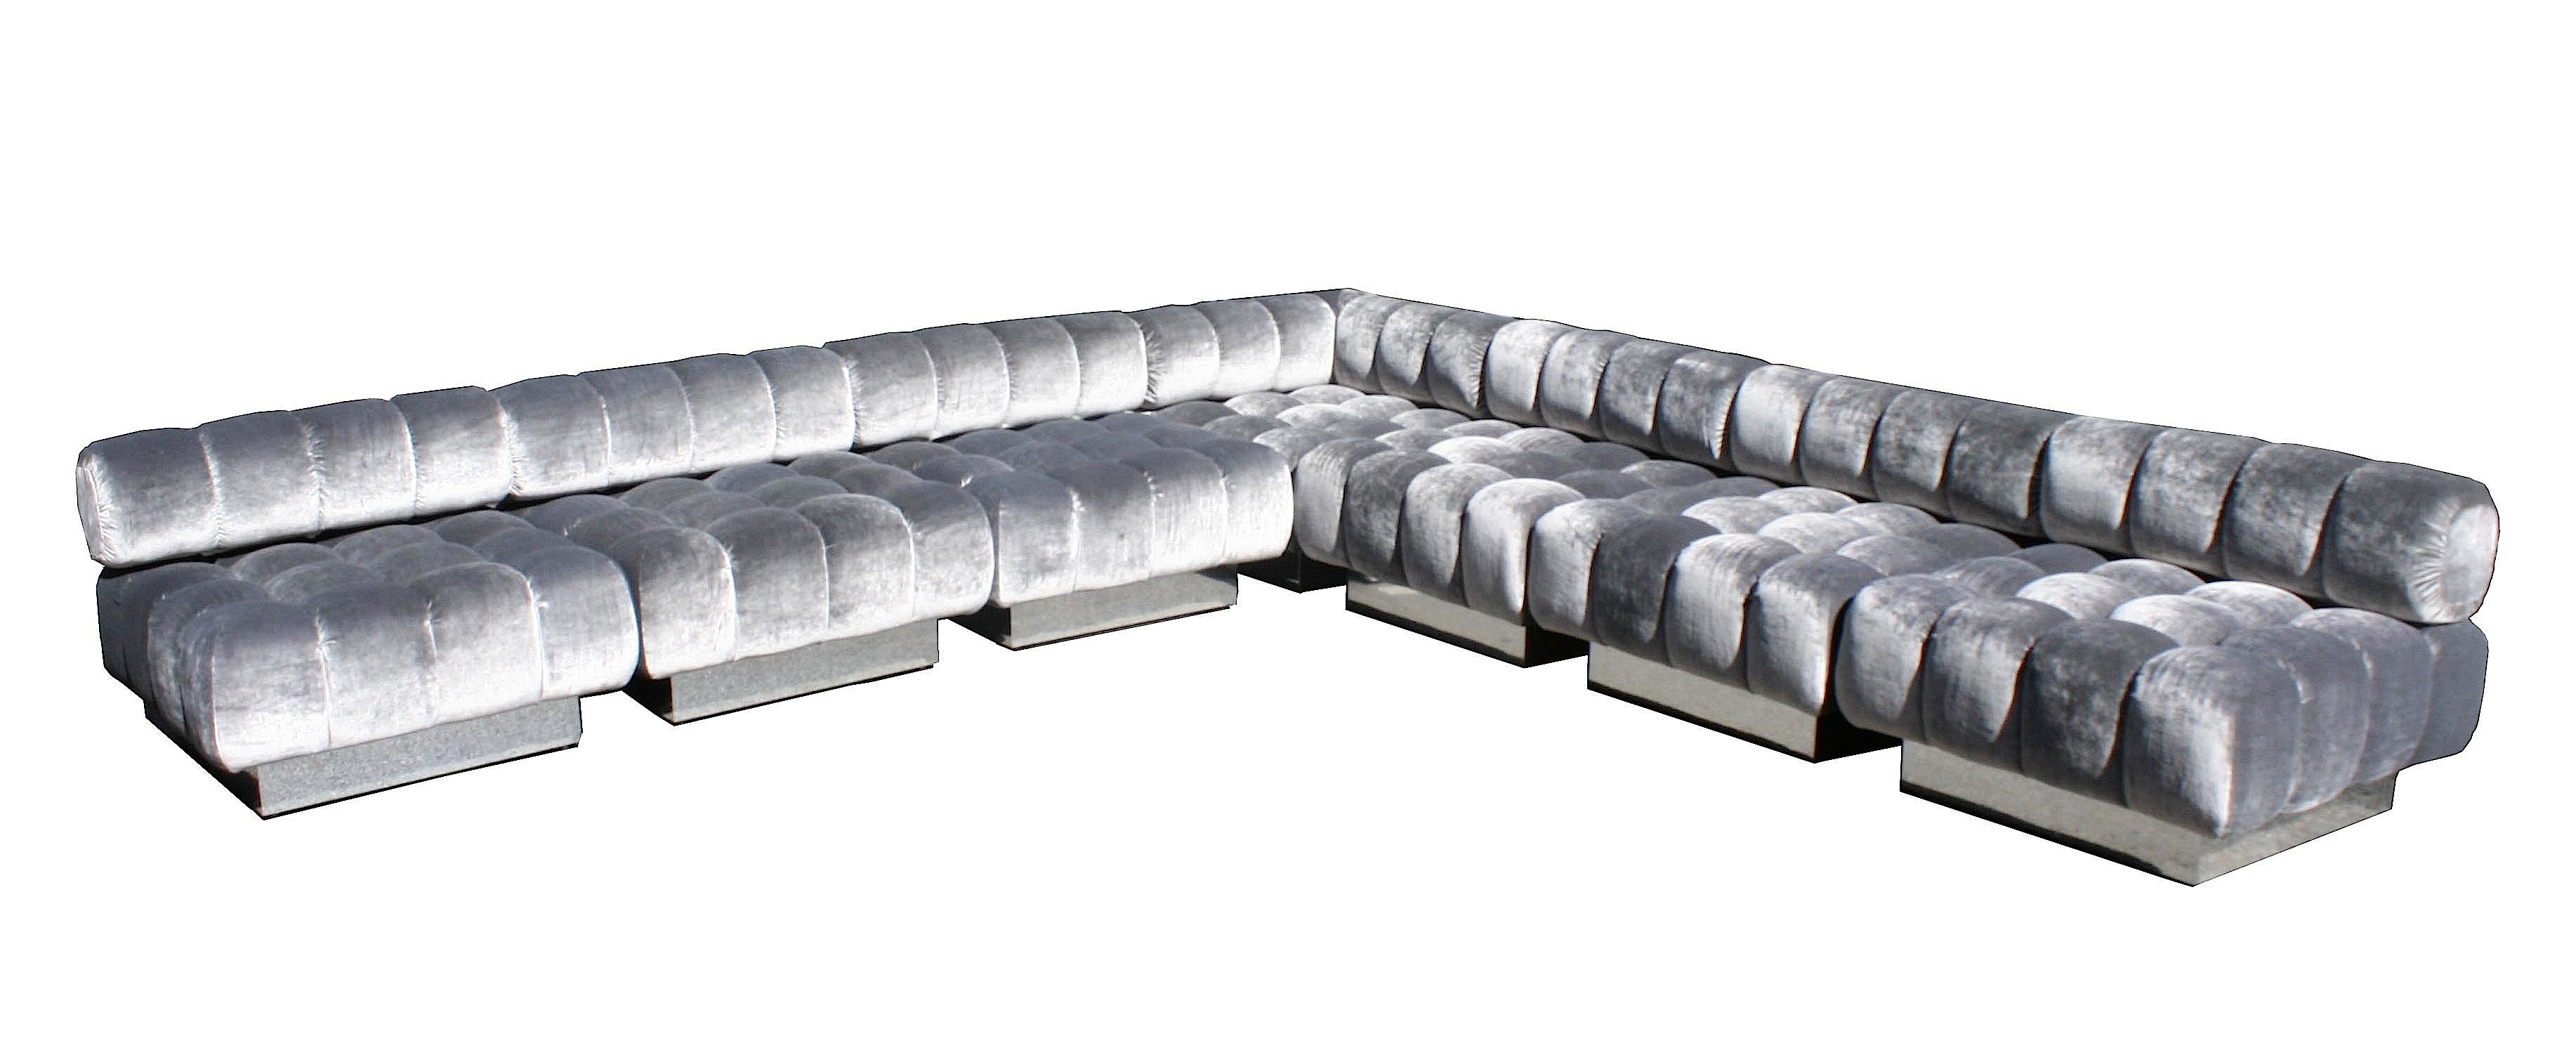 A Seven-Section Deep Tufted Sofa by Harvey Probber. USA, 1970s.